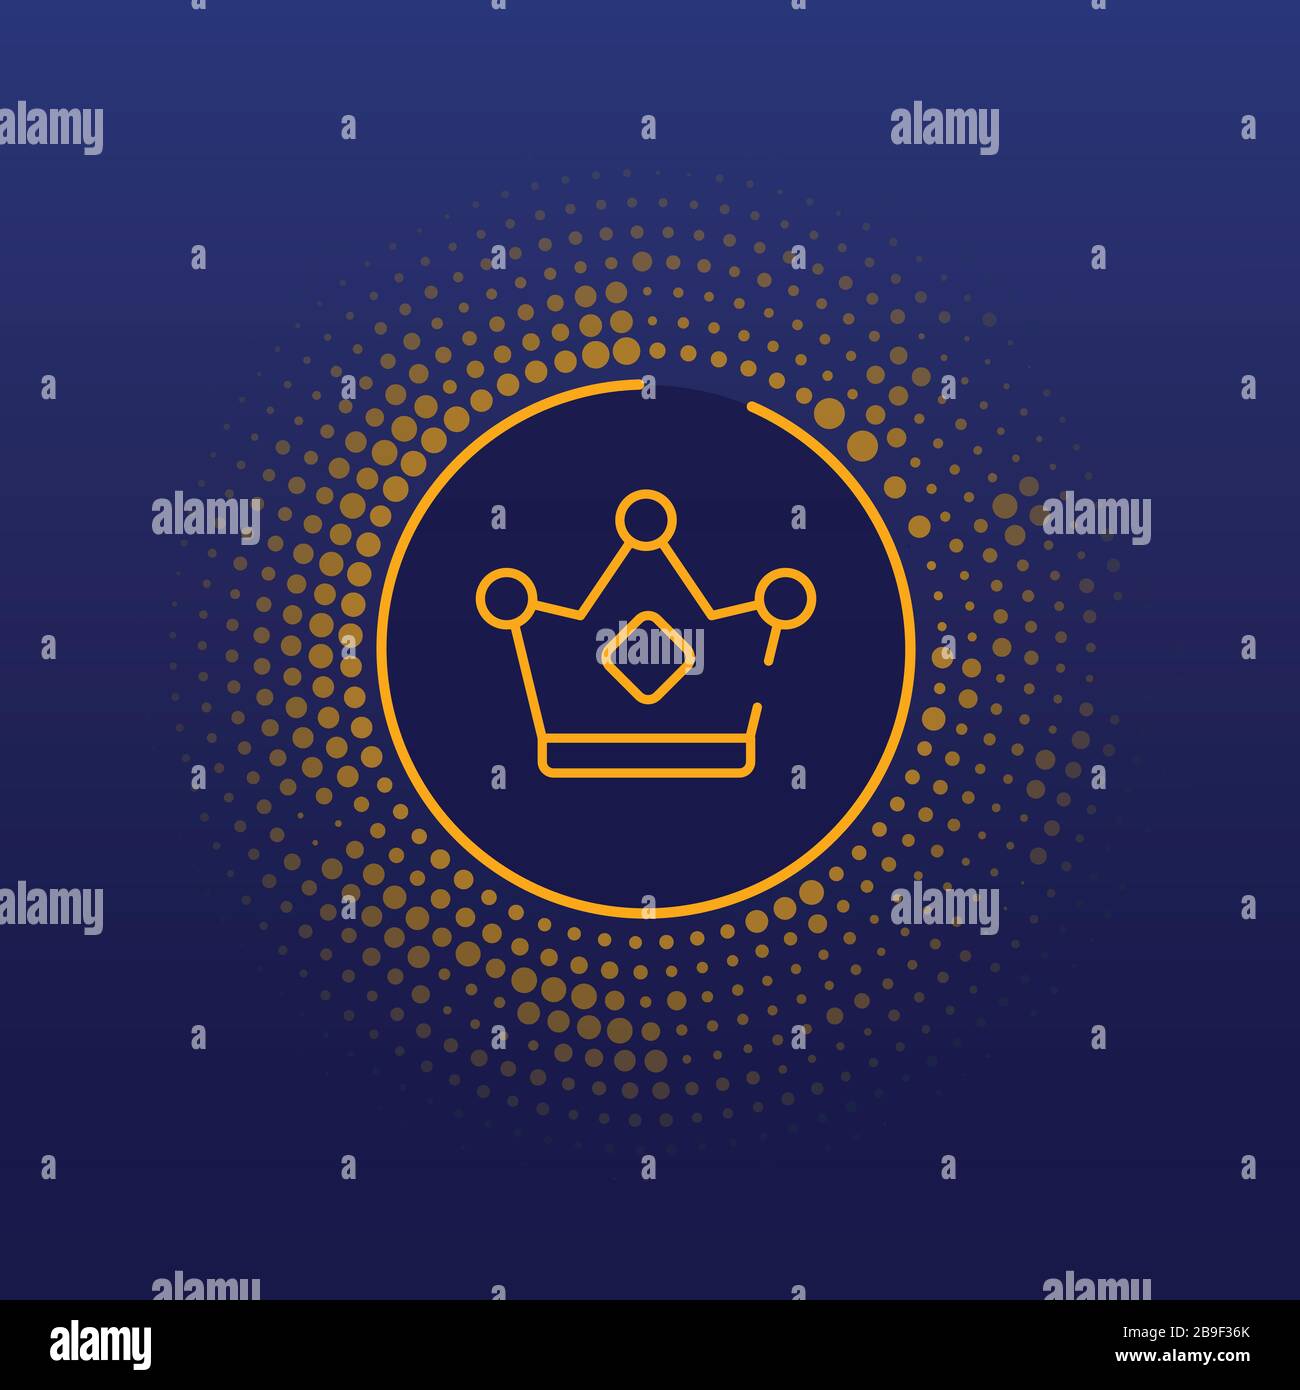 crown logo and icon vector Isolated image Stock Vector